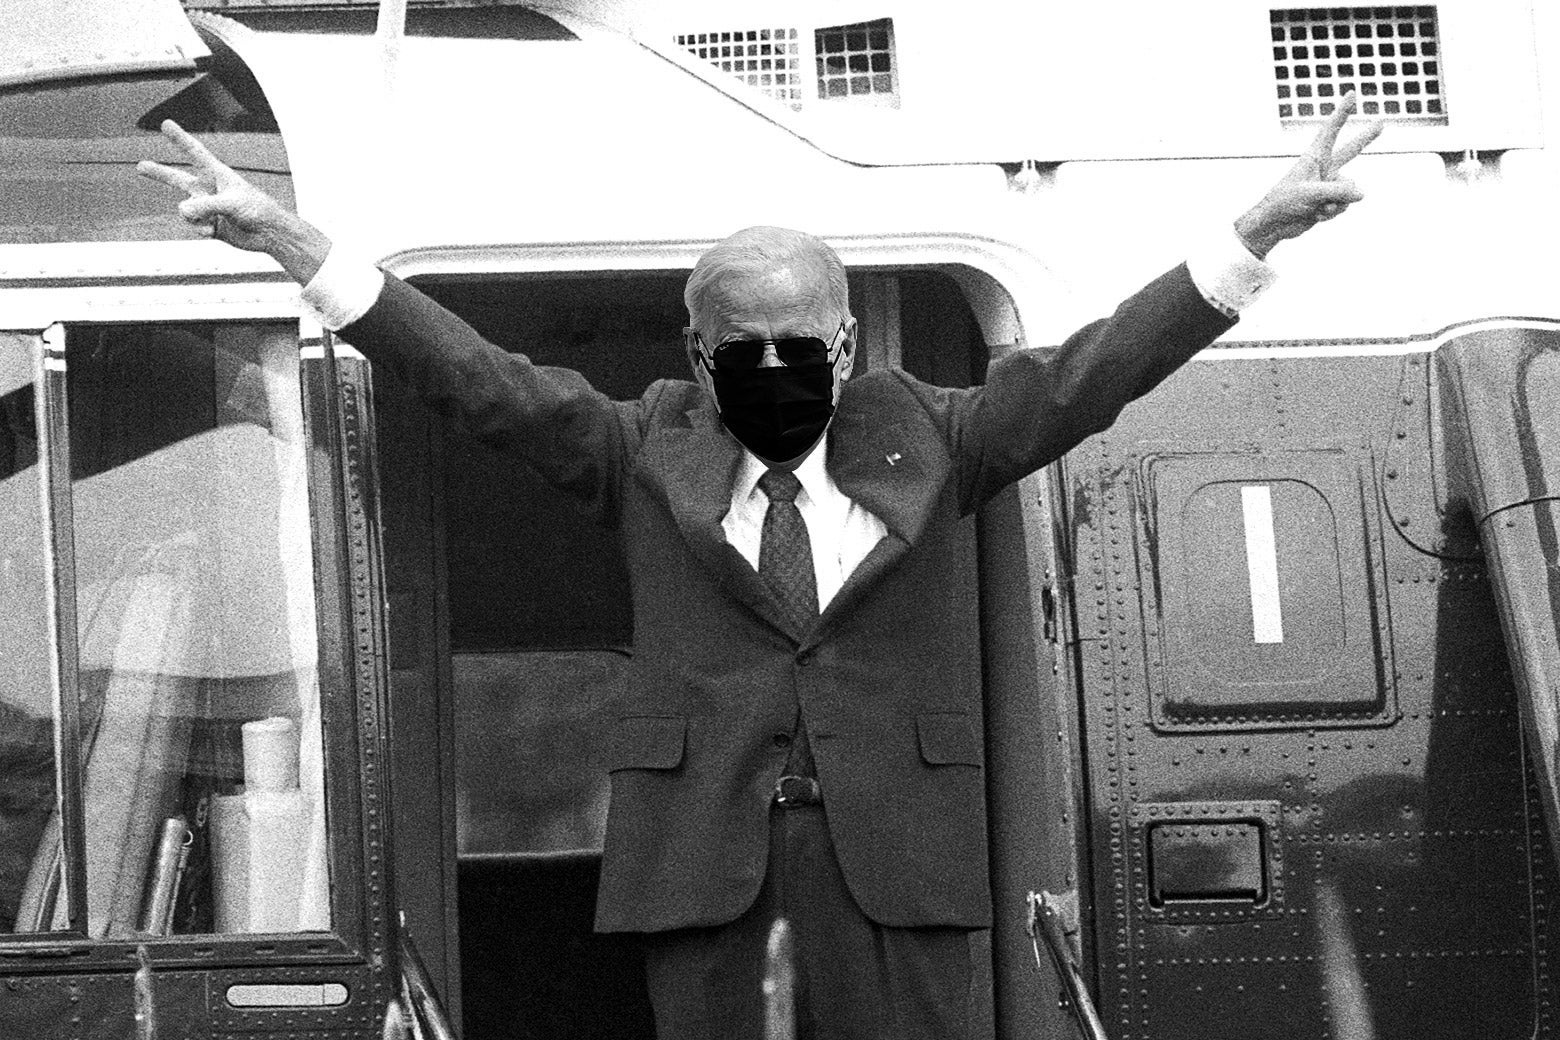 The famous image of Richard Nixon flashing peace signs while boarding a helicopter after resigning the presidency, except Nixon's face has been replaced by Biden's wearing aviator sunglasses and a black COVID mask